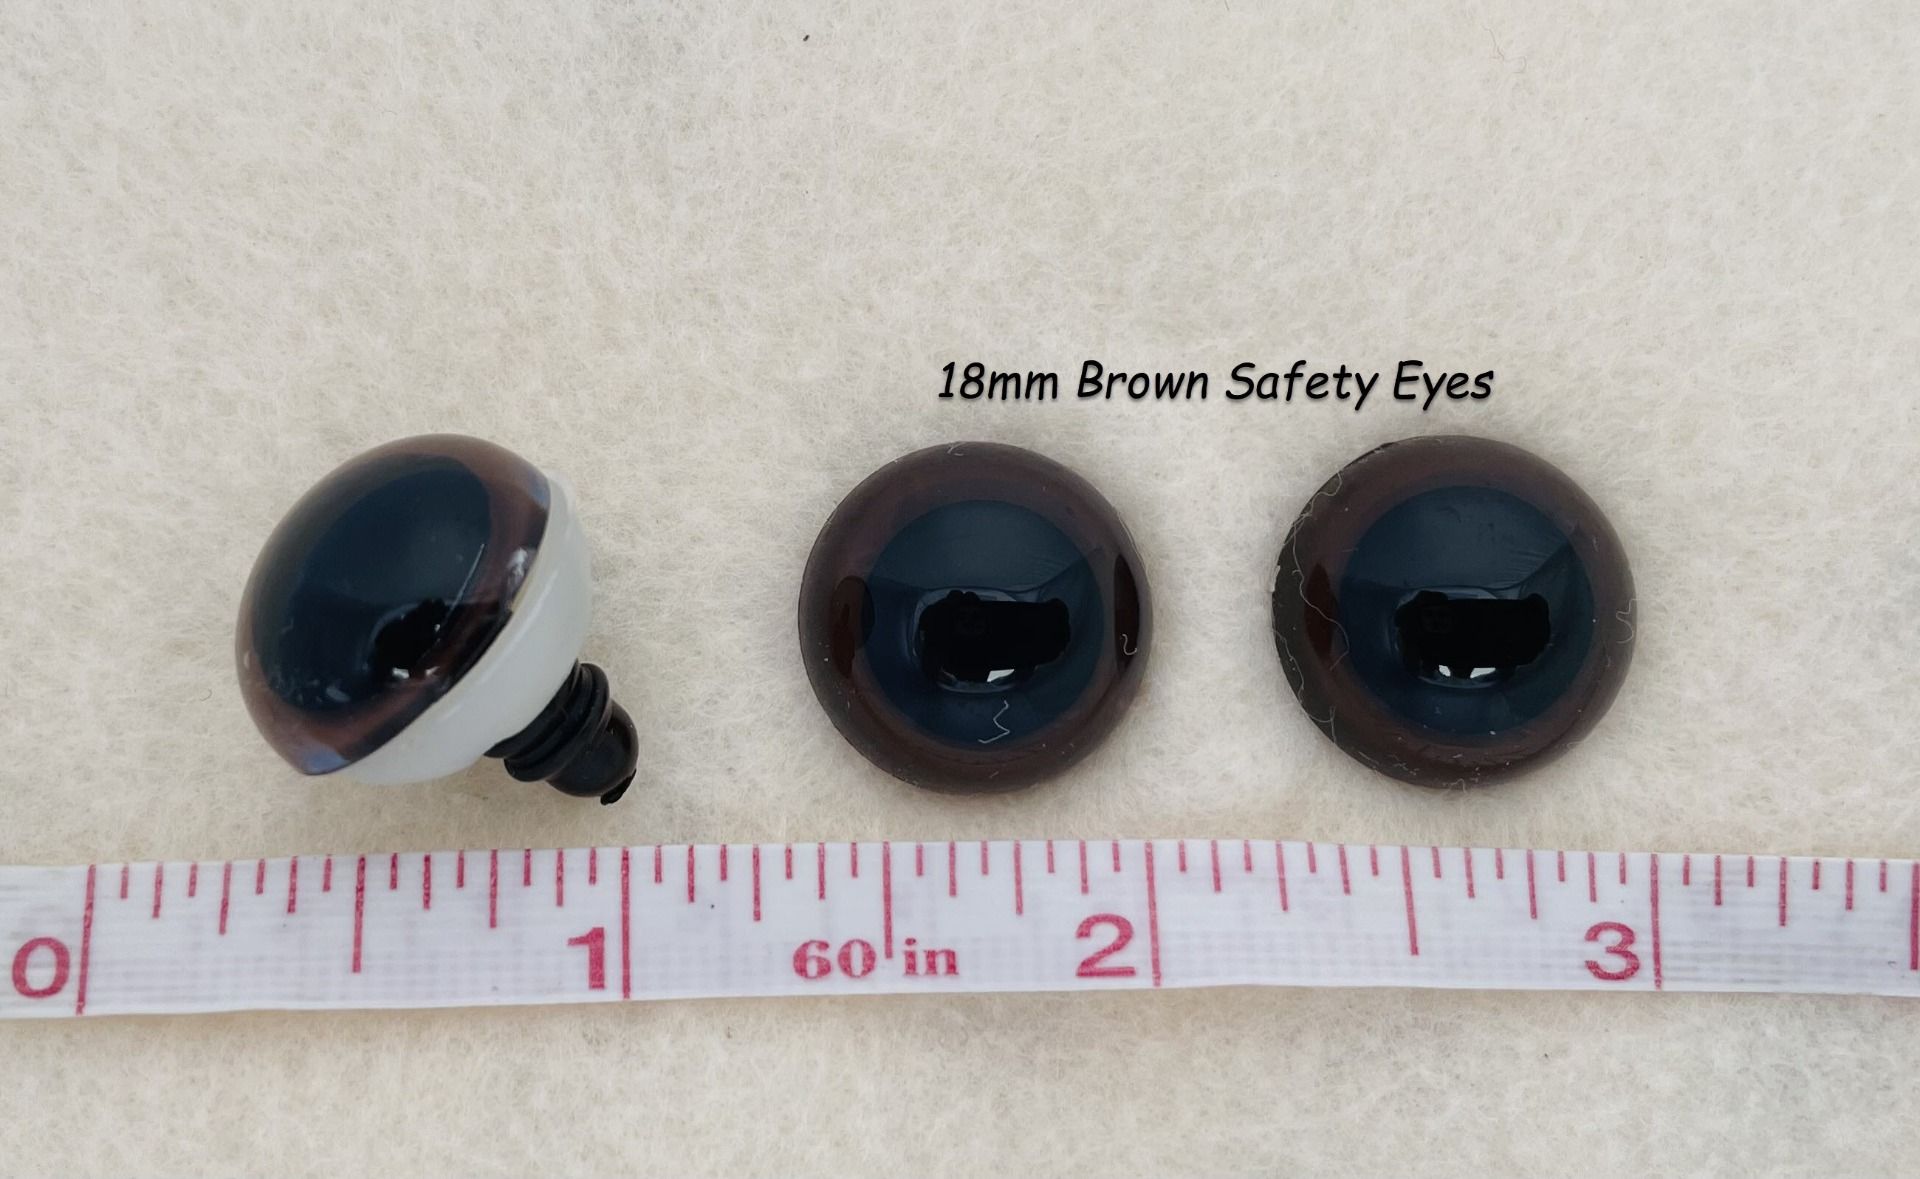 Safety Eyes Solid Colors, Black Safety Eyes, Clear Safety Eyes